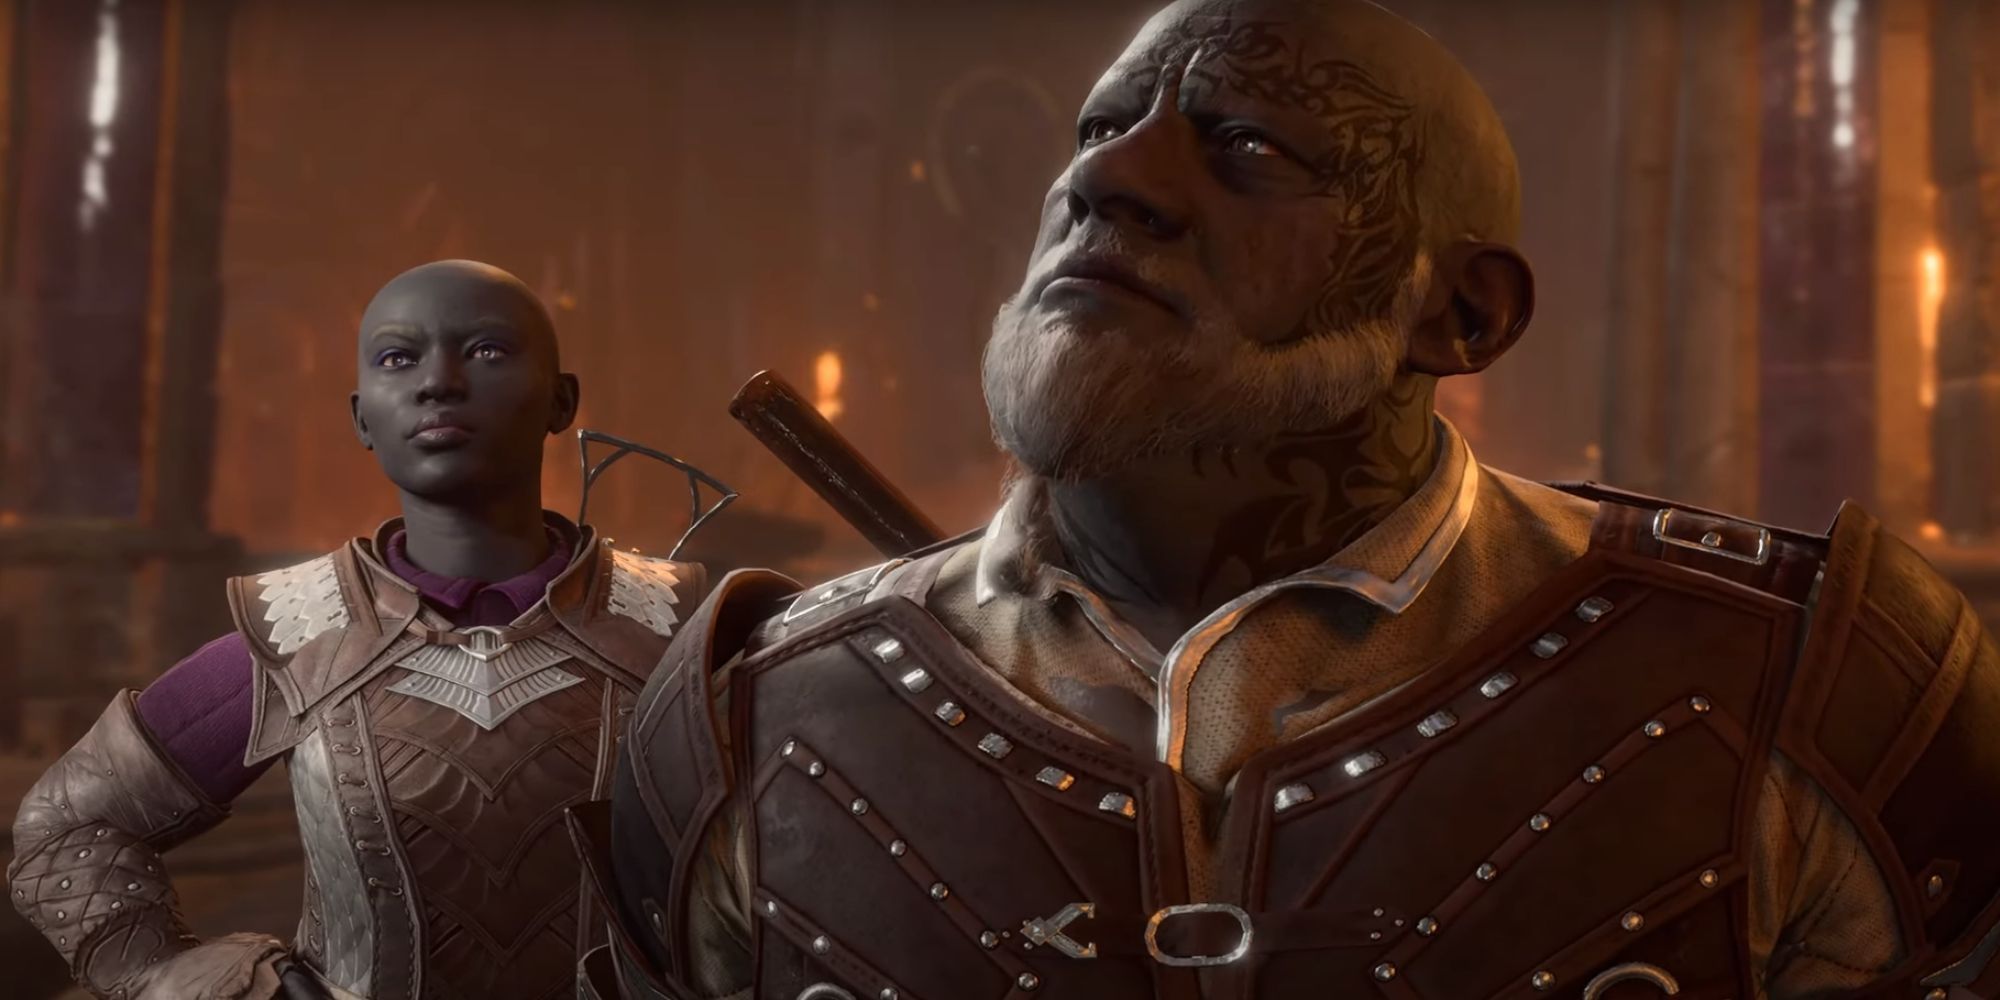 A cutscene showing two short, Duergar dwarves with shaved heads, leather armor, and dark skin.